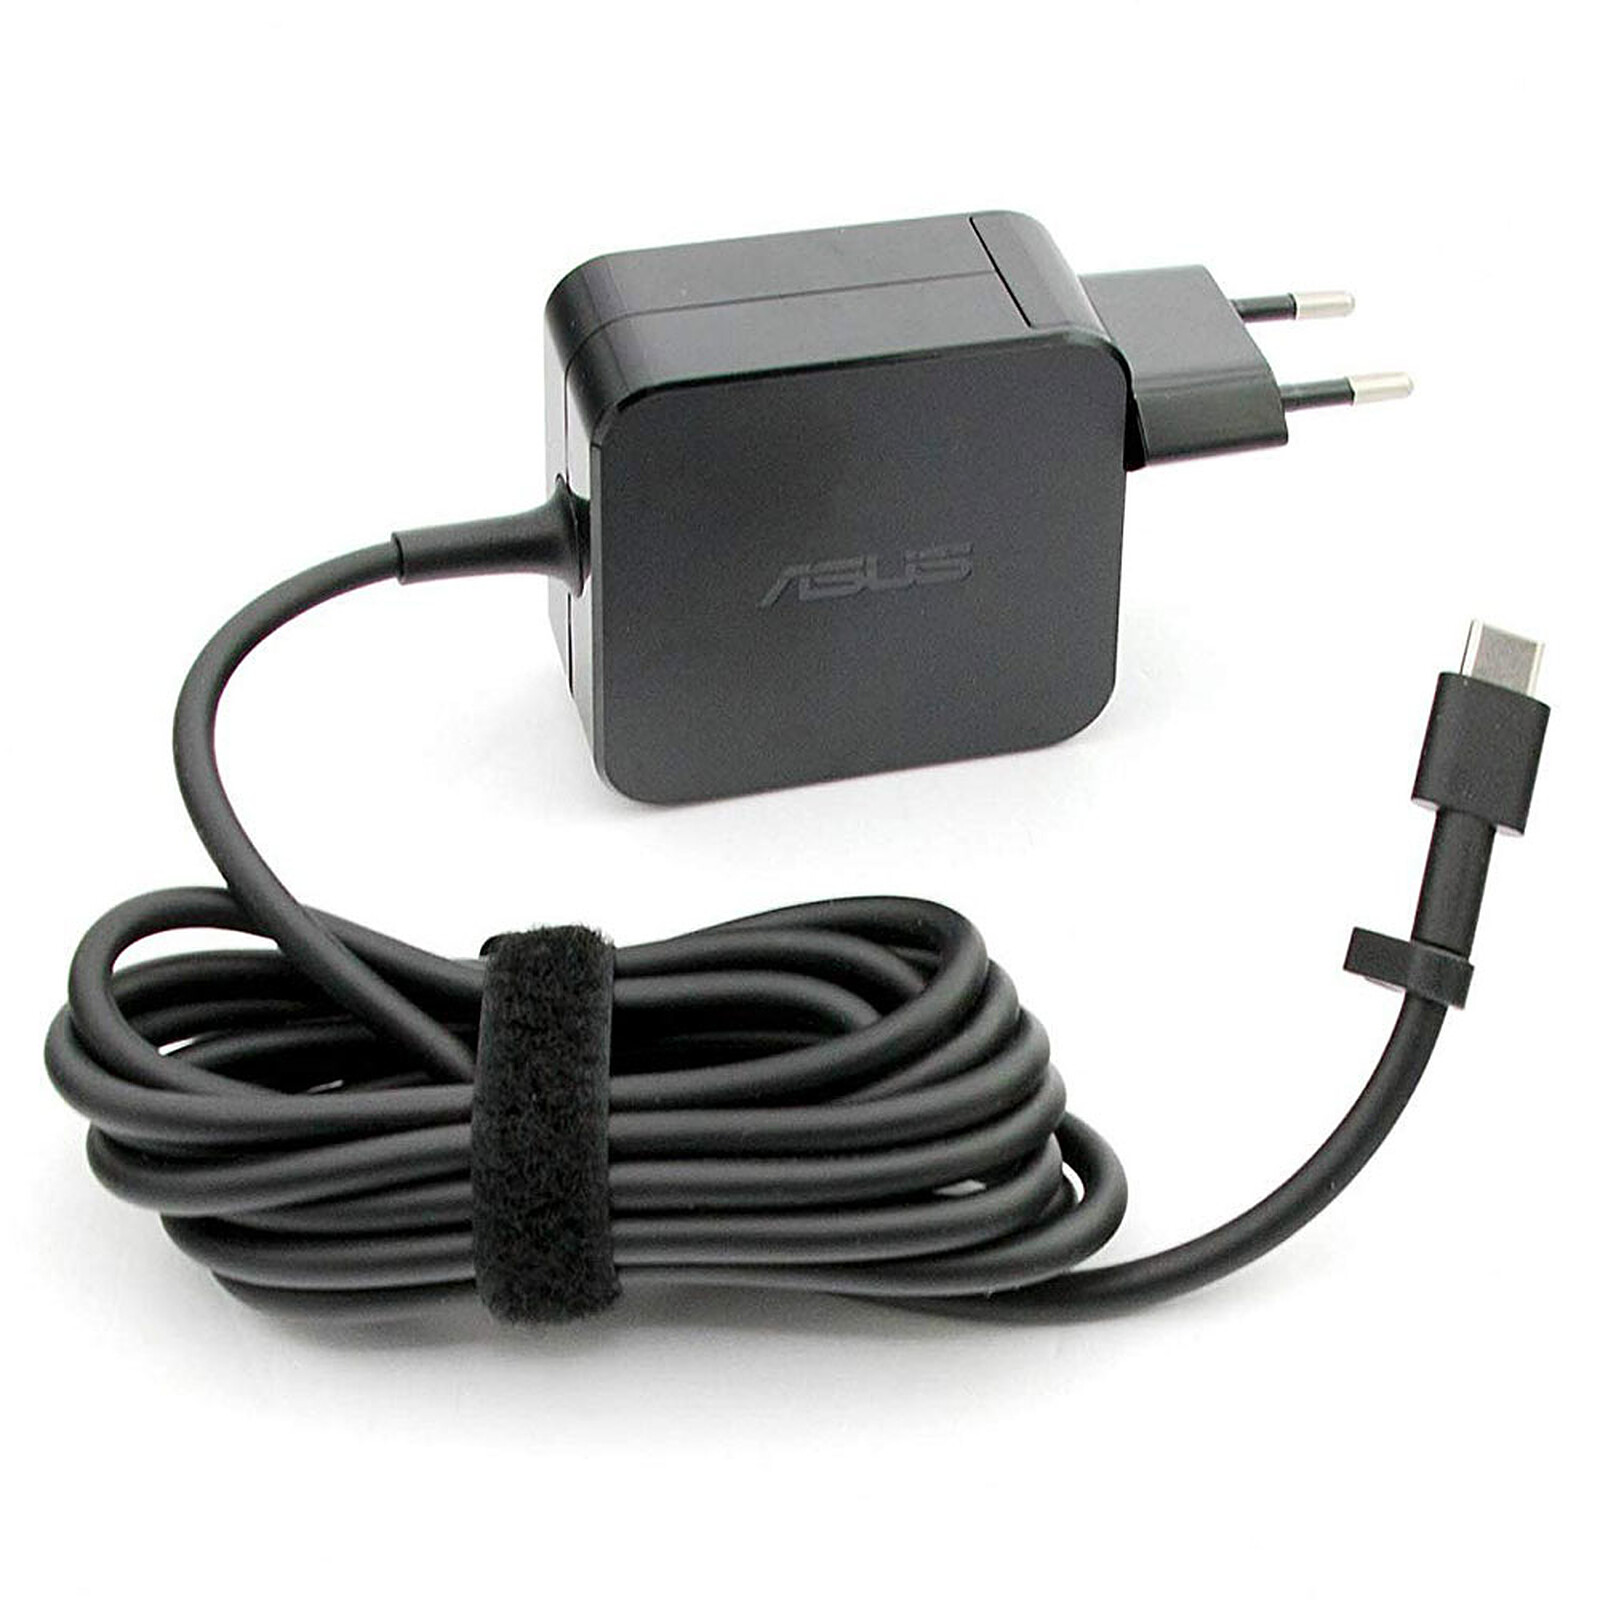 ASUS 65W USB-C Power Adapter (0A001-00443300) - Laptop charger